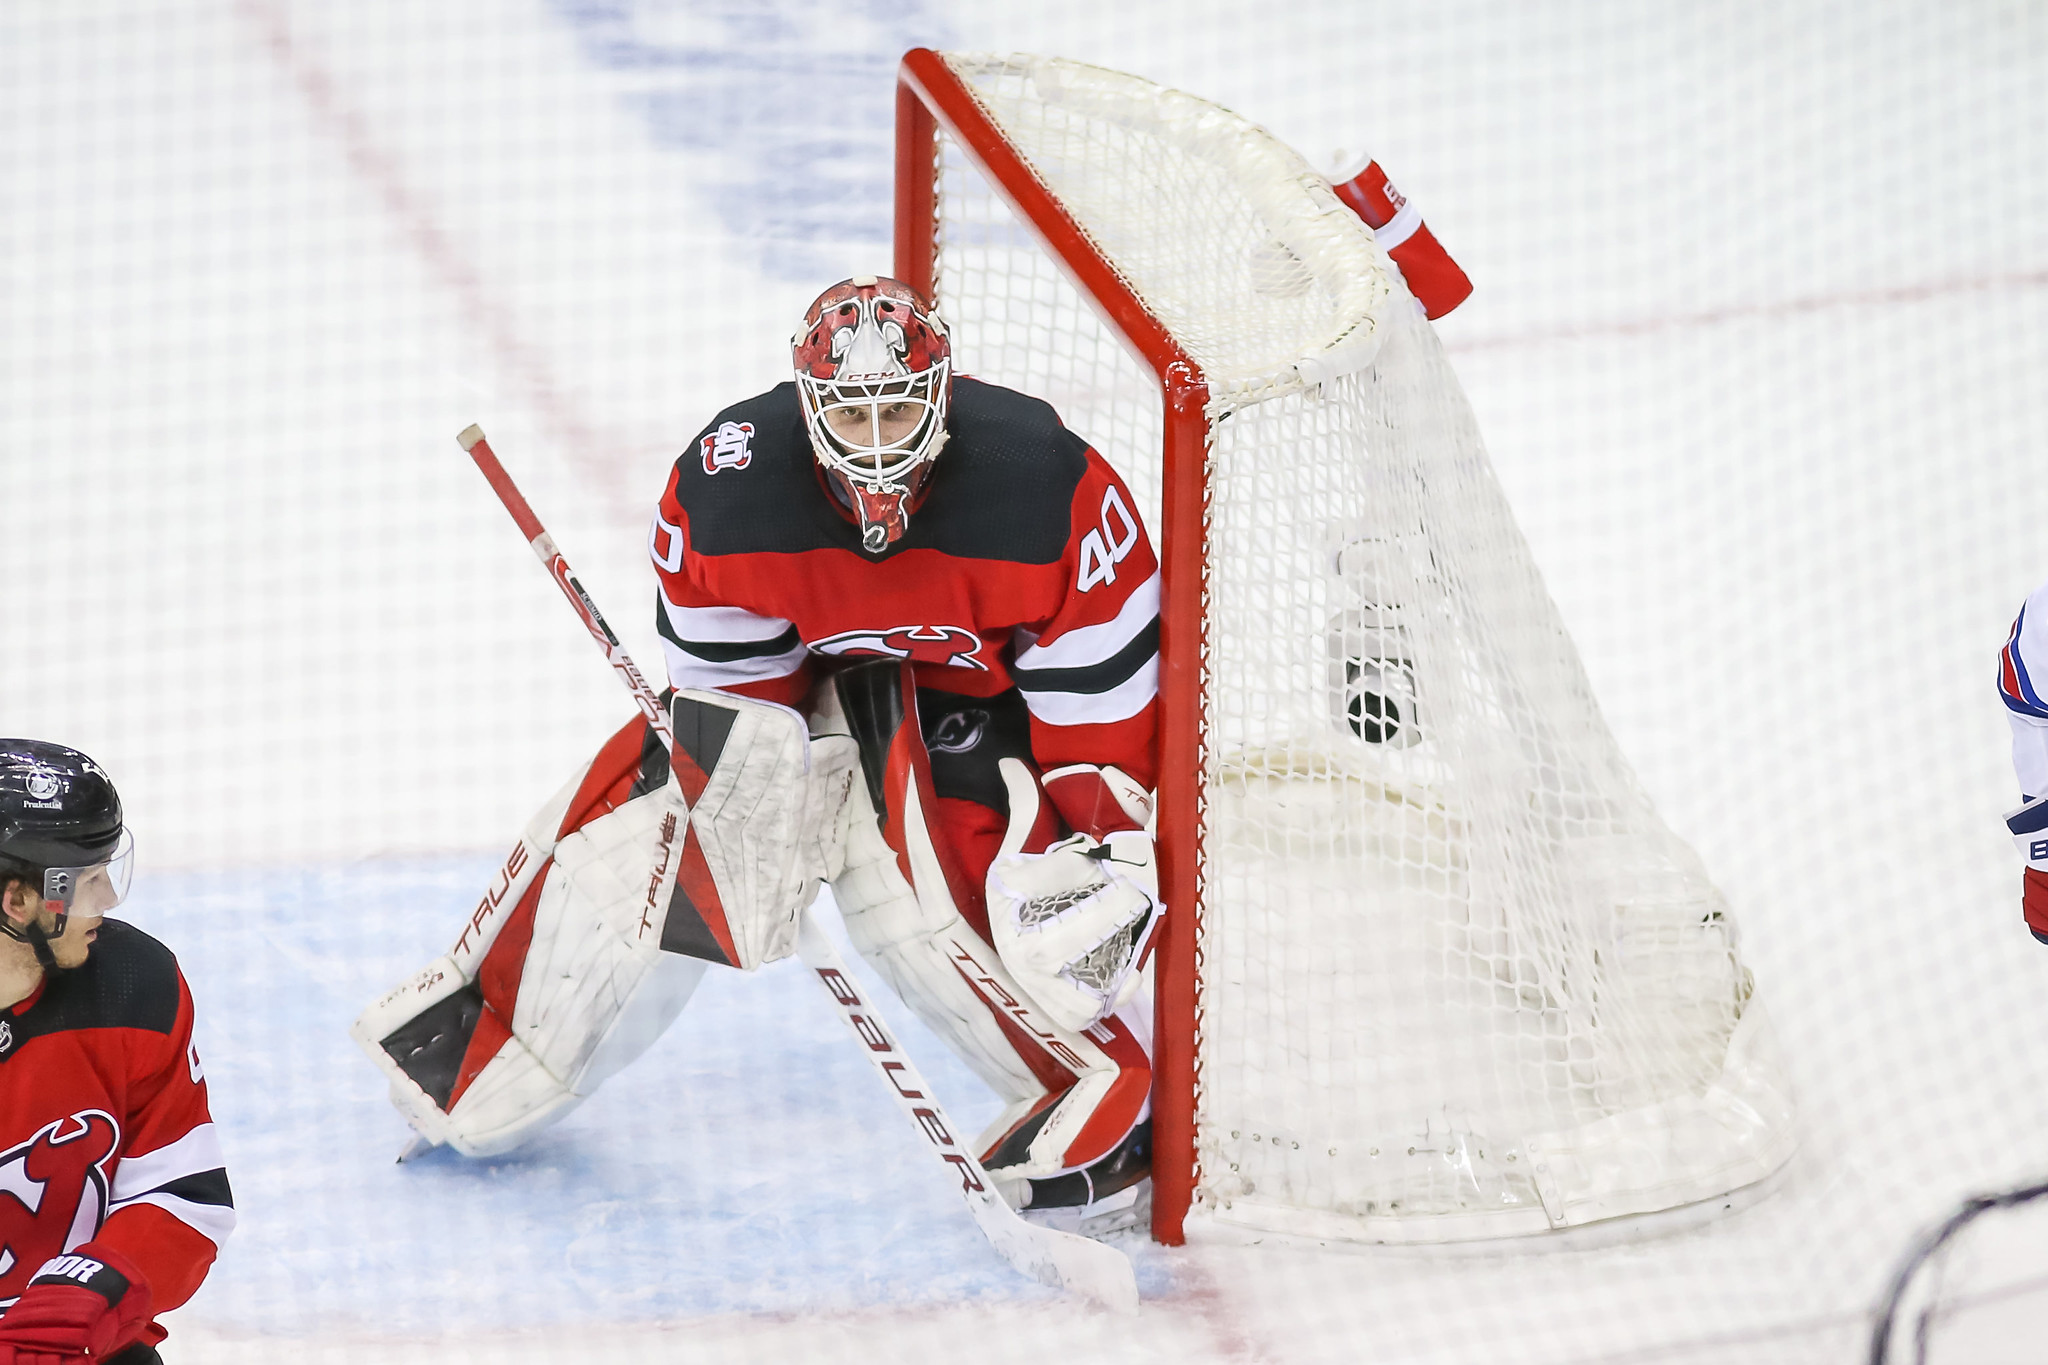 New Jersey Devils 2021-22 Season Preview Part 3: Goalies - All